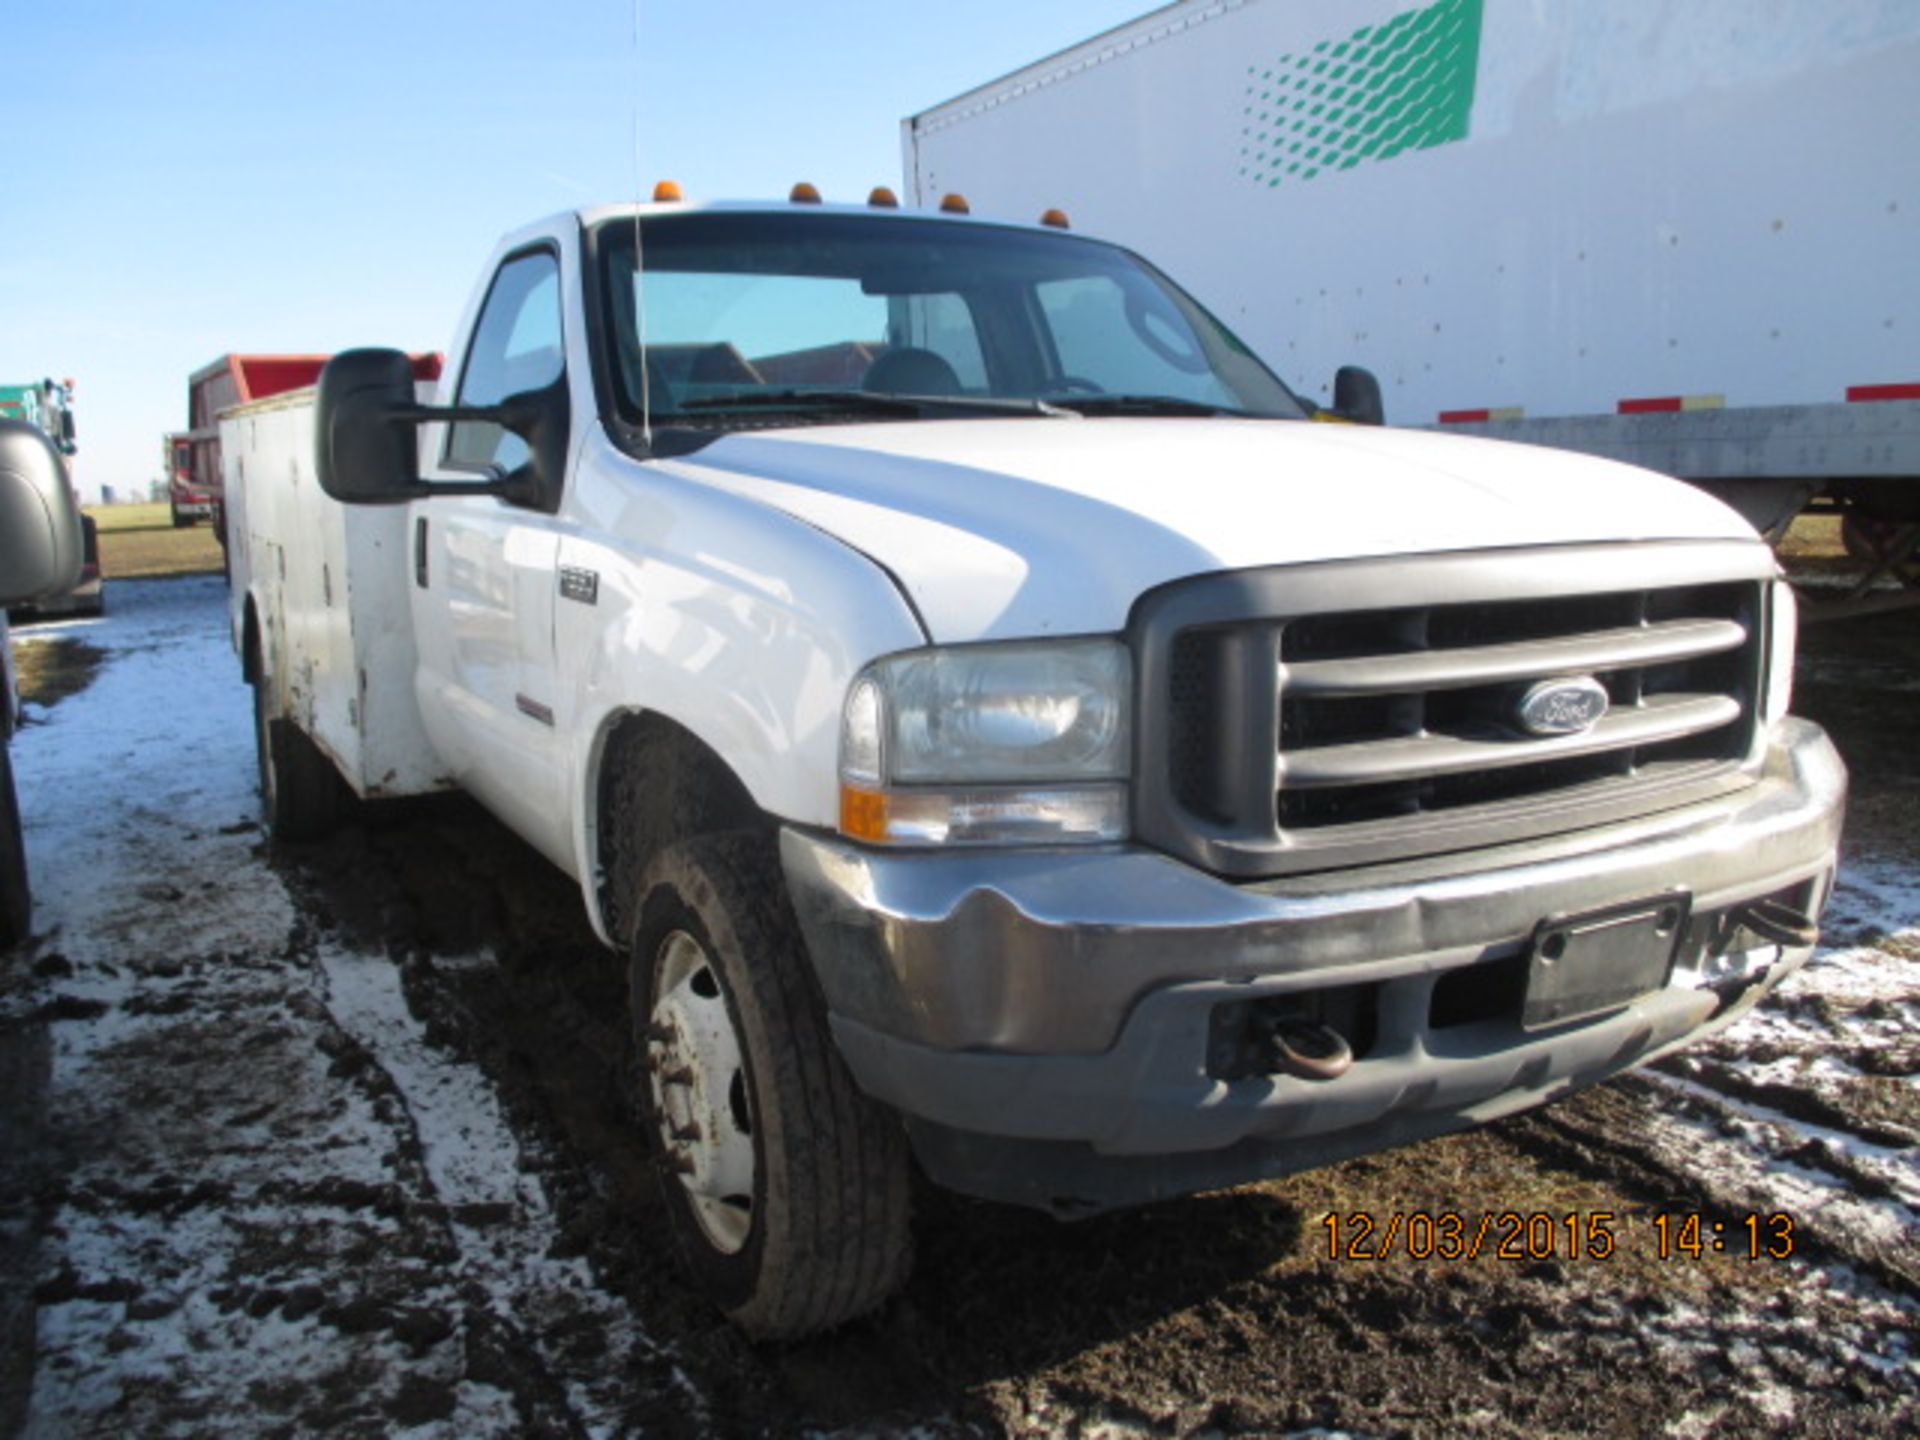 TITLE-2004 Ford F-550 XL Super Duty, 4x2, 5-spd, 6.0 dsl, service body, 184,901 miles ( - Image 2 of 3